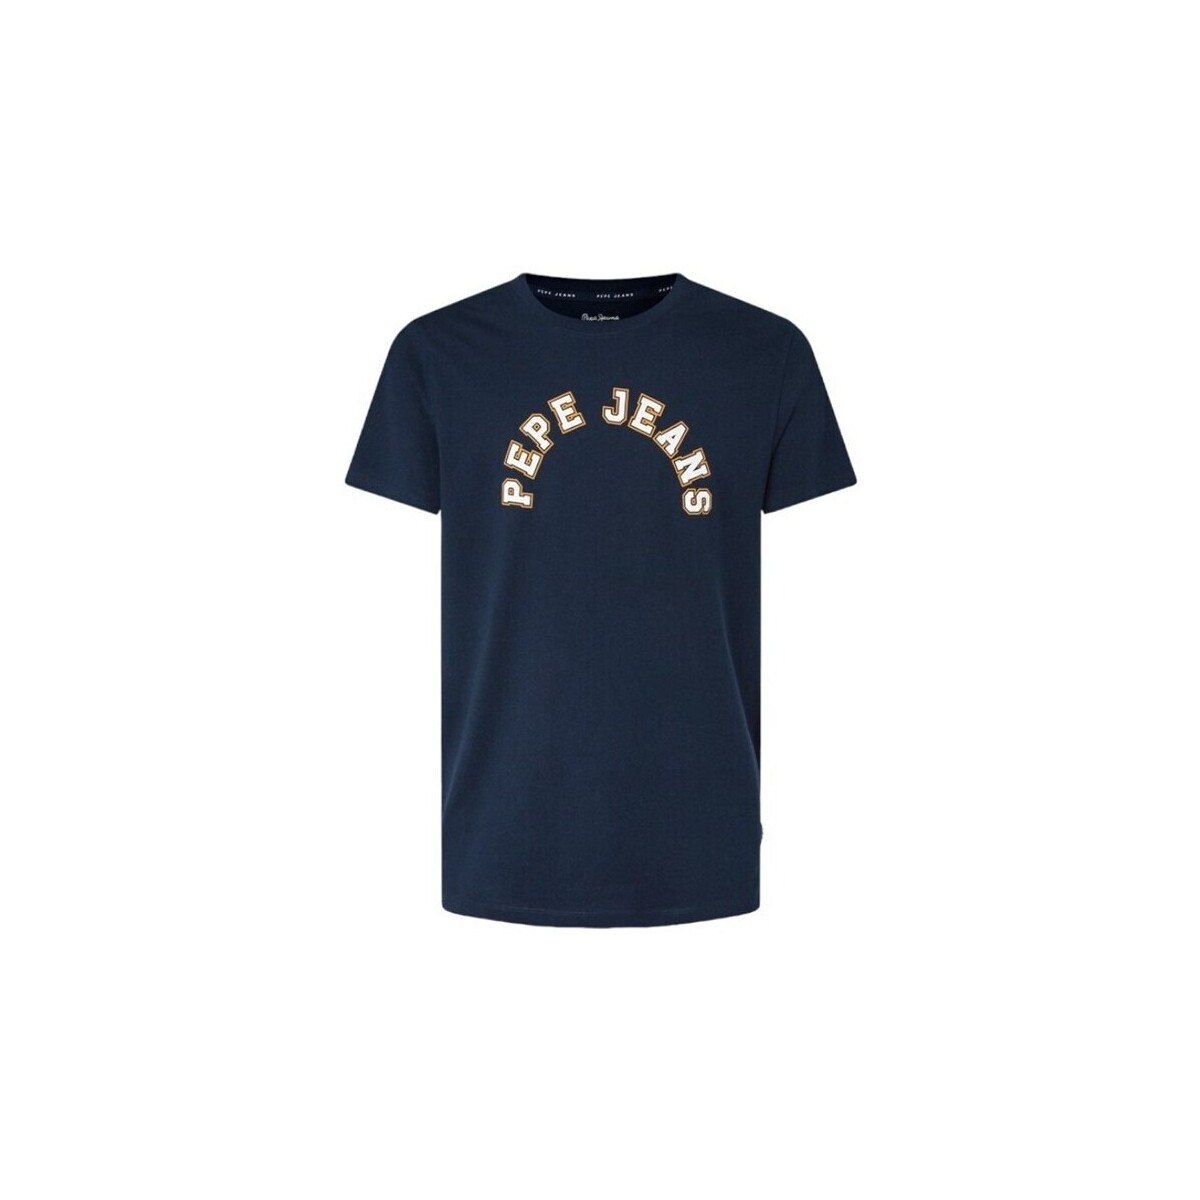 pepe jeans  westend tee future  men's t shirt in marine